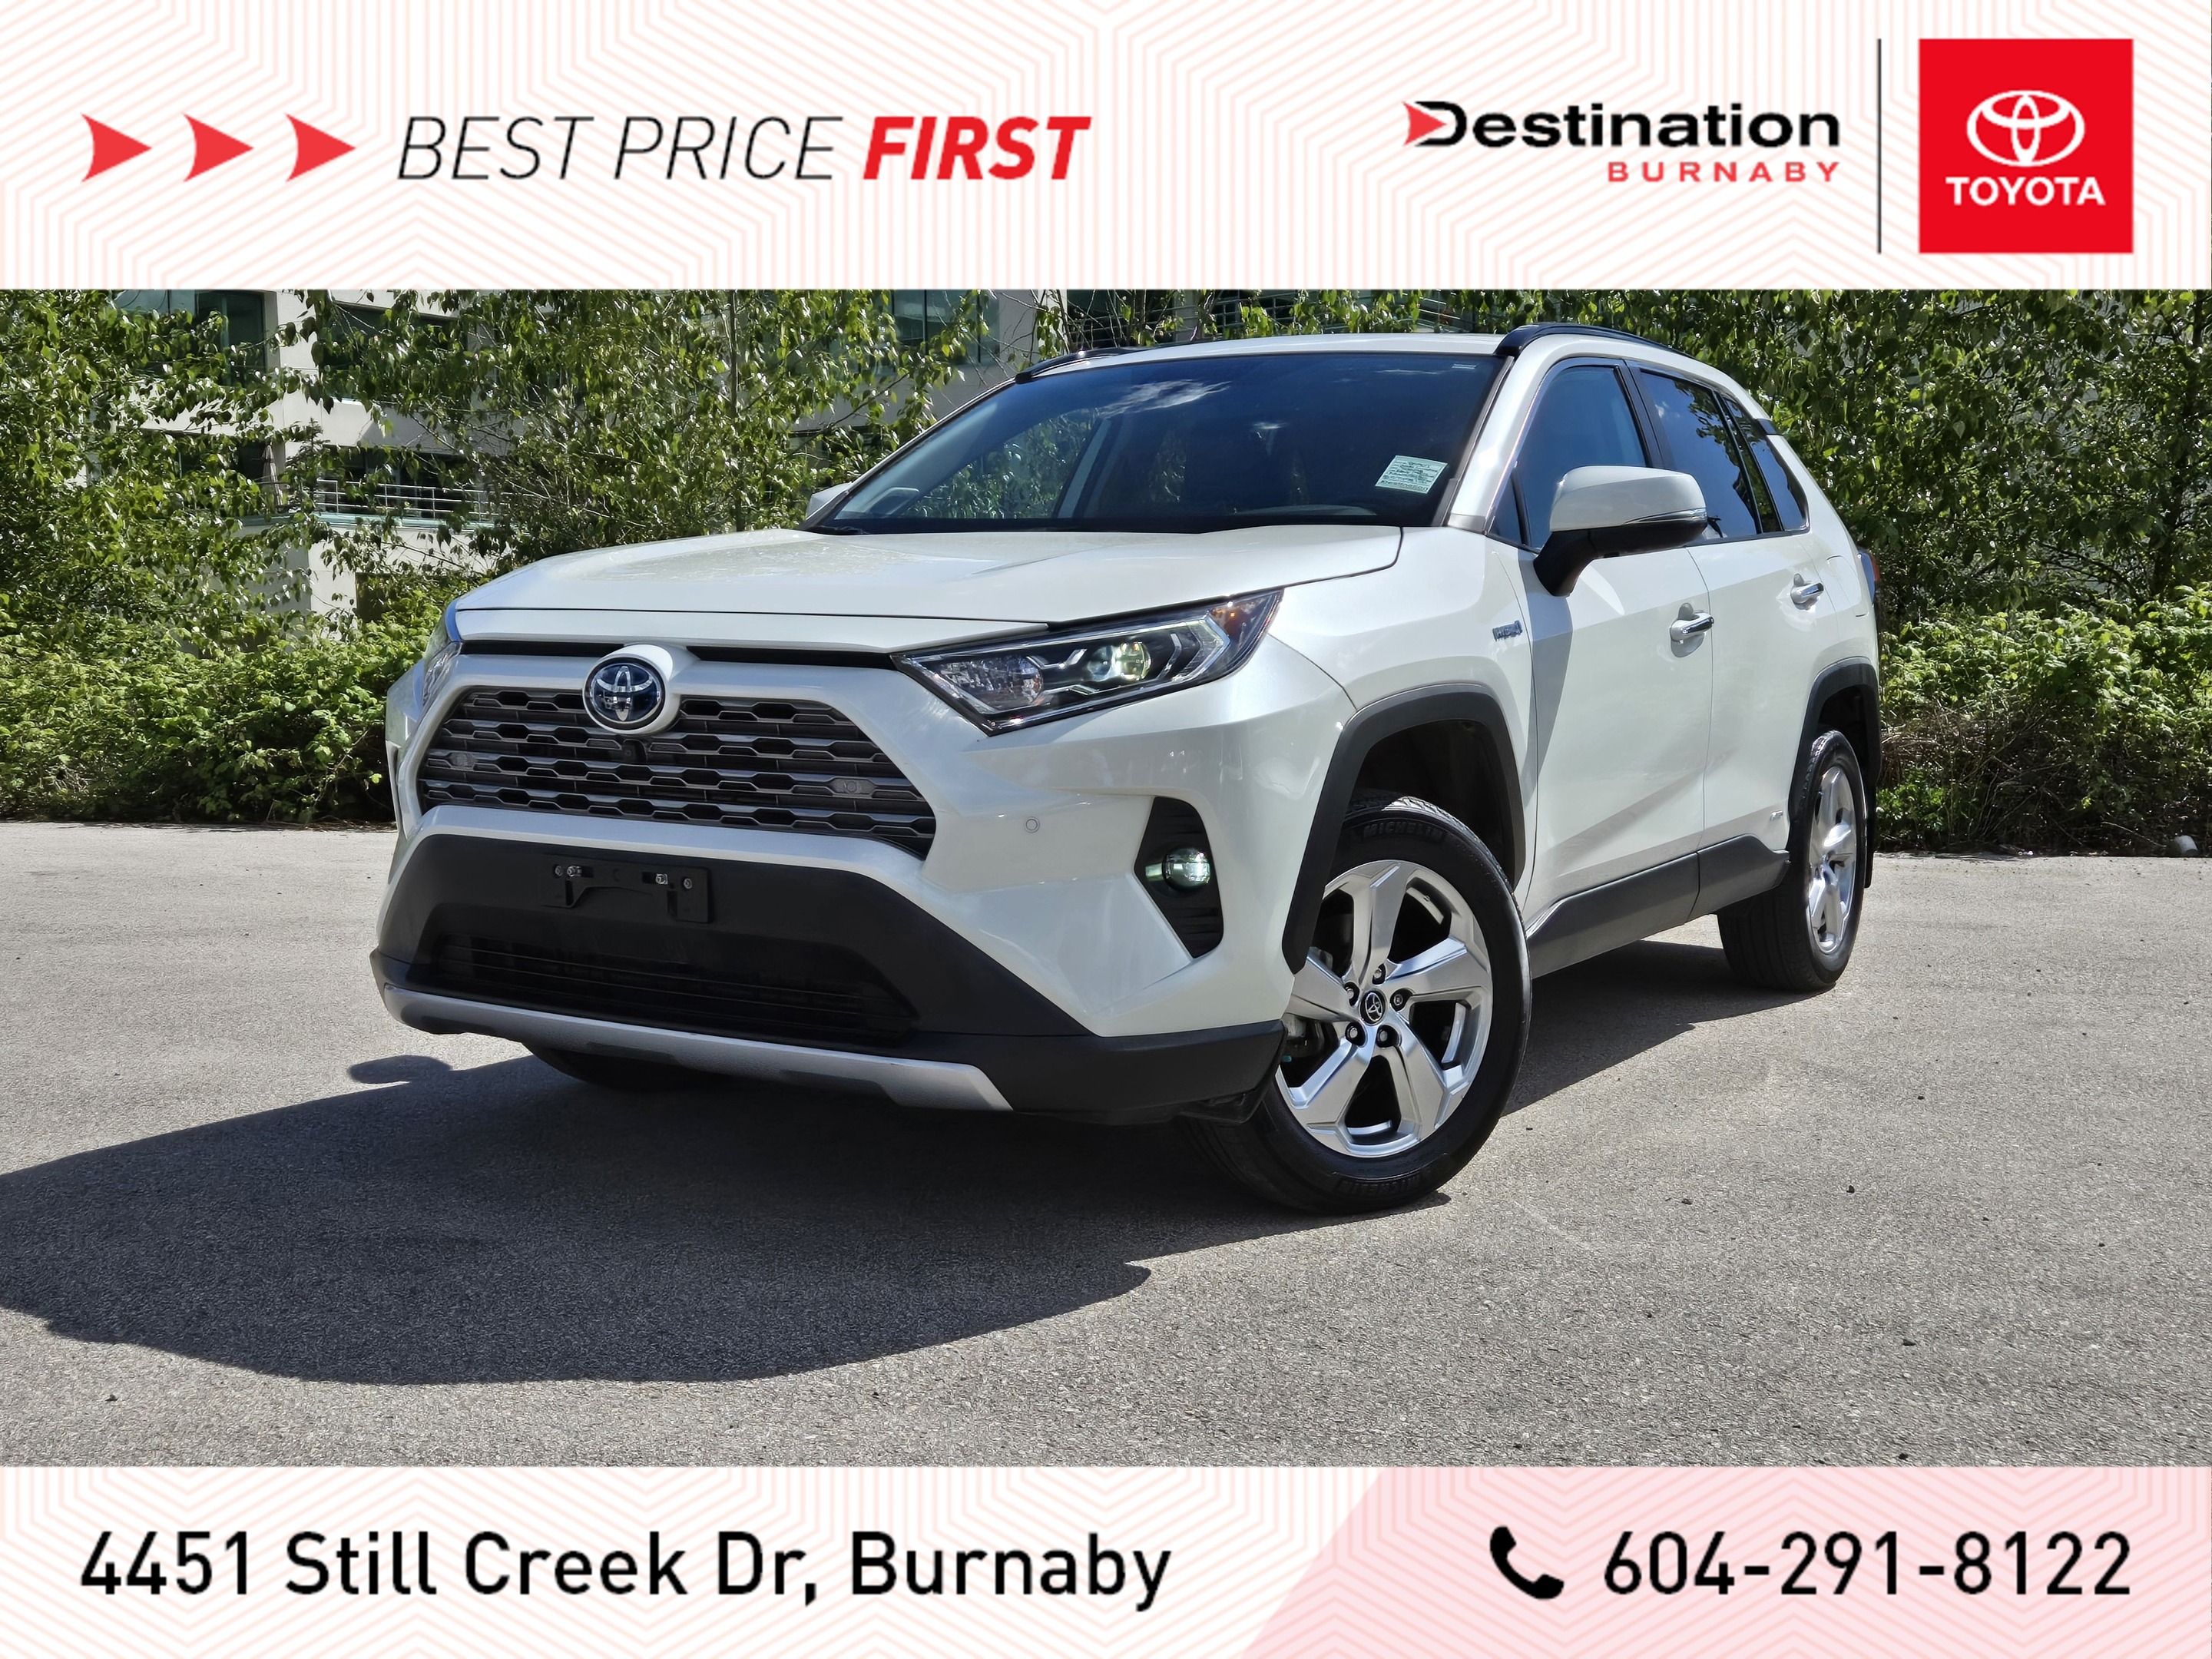 2021 Toyota RAV4 Hybrid Limited AWD - Local, One Owner, Fully Loaded!